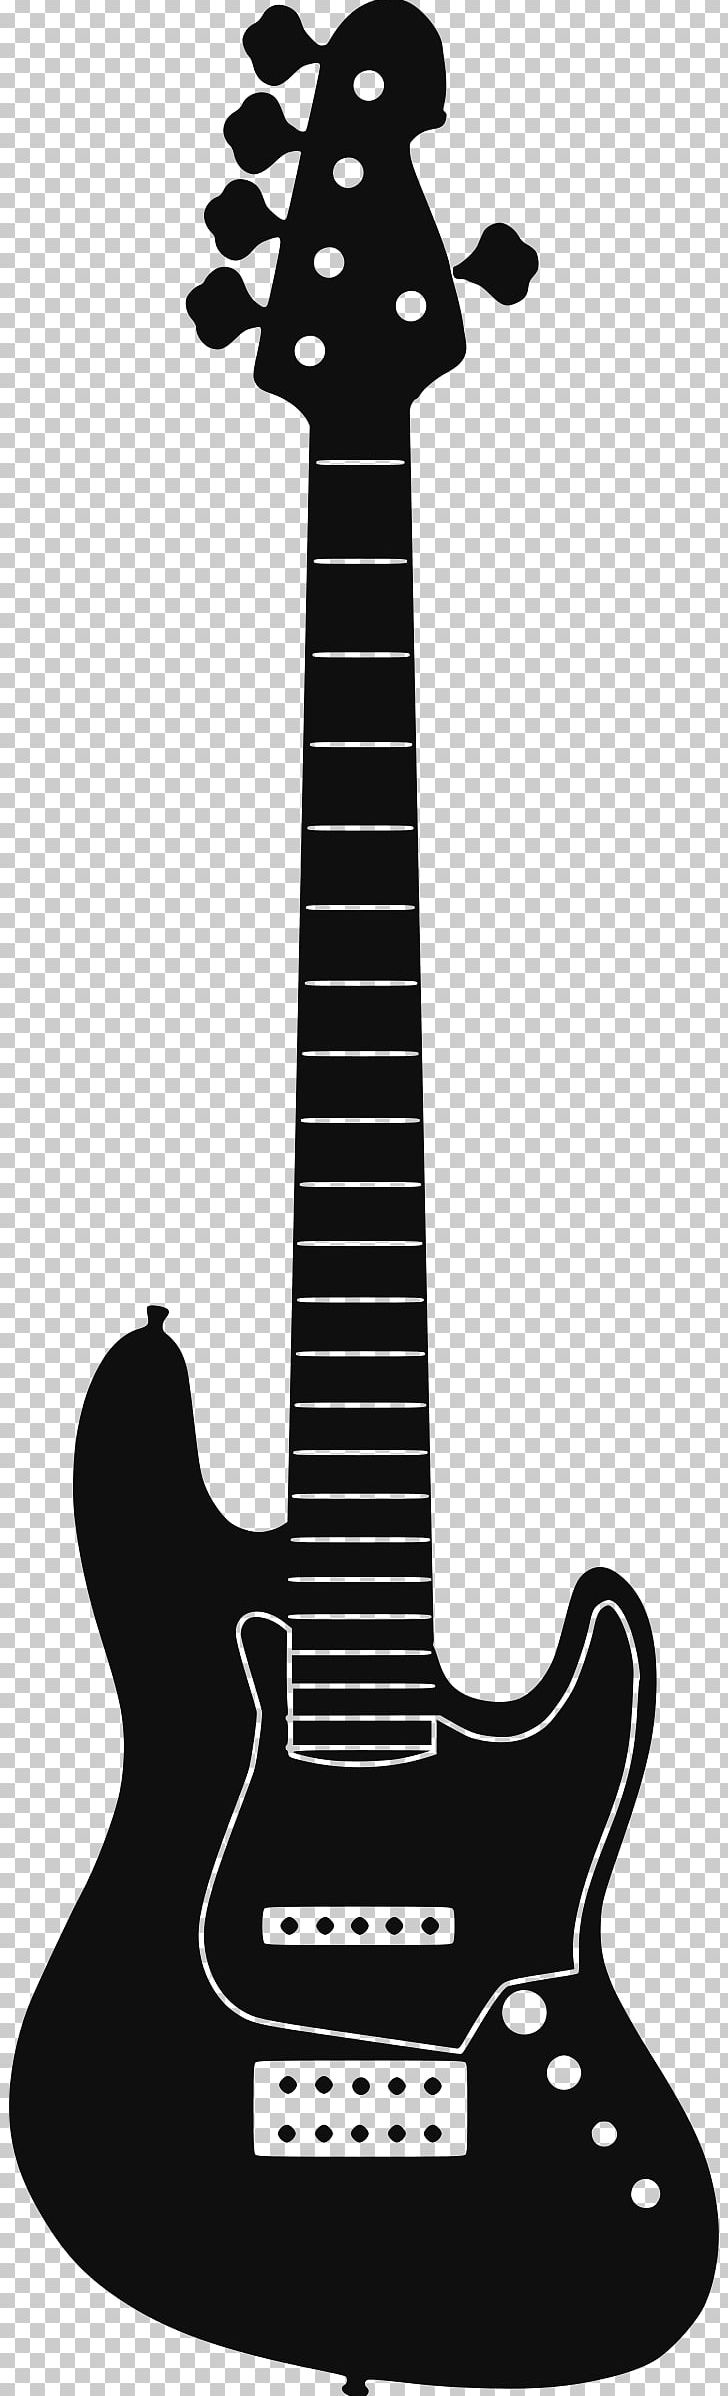 Fender Aerodyne Jazz Bass Fender Stratocaster Fender Precision Bass Fender Jaguar Bass Bass Guitar PNG, Clipart, Acoustic Electric Guitar, Double Bass, Guitar Accessory, Guitarist, Monochrome Free PNG Download